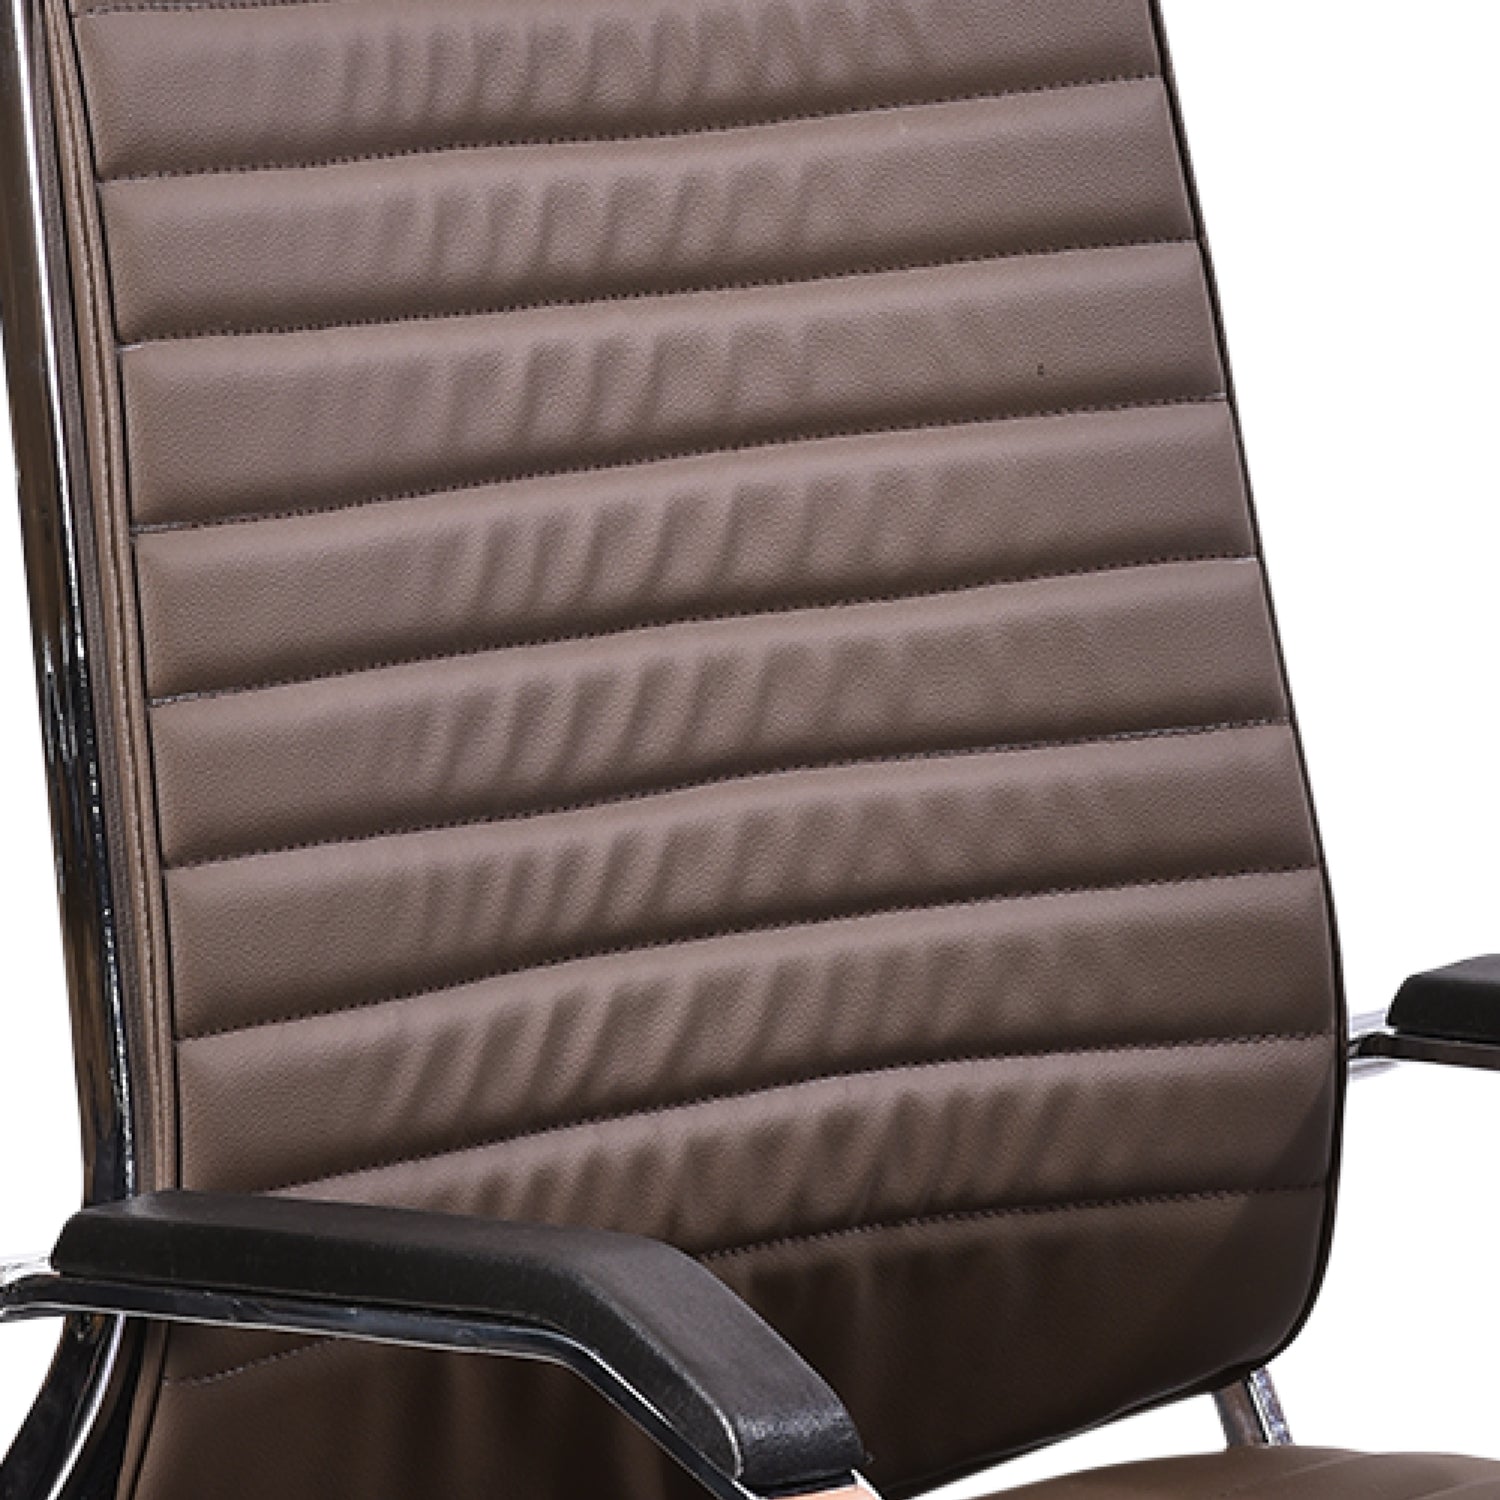 ZFD1018 Medium Back Chair by Zorin in Brown Color Zorin